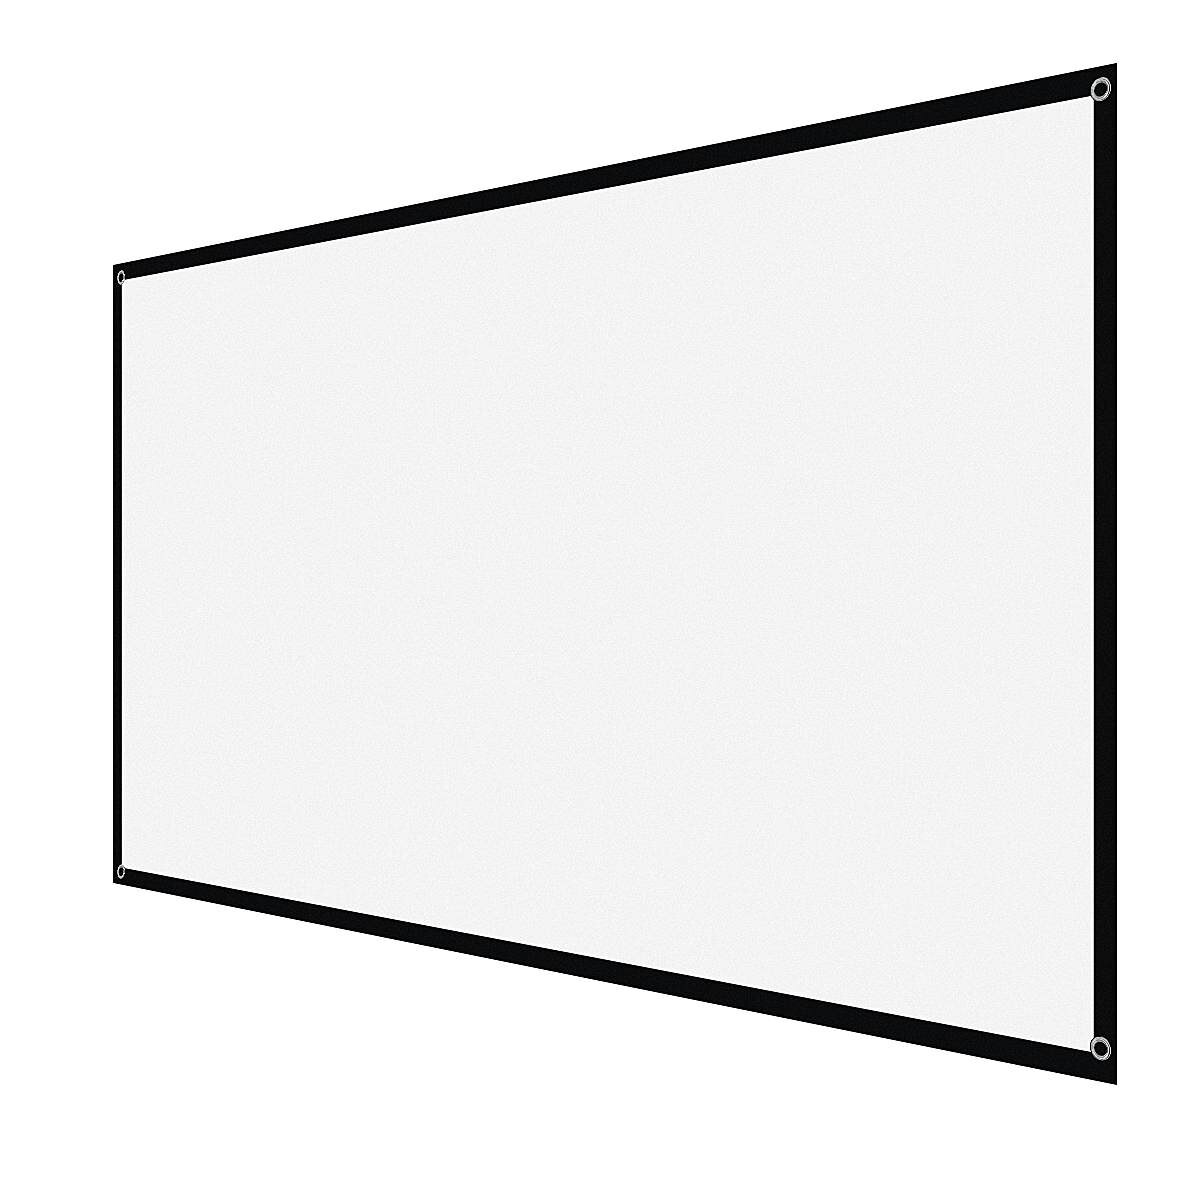 Projector Screen 60 72 84 100 120 Inch 3D Hd Wandmontage Draagbare Projectiescherm Canvas Led Projector Voor Thuis theater